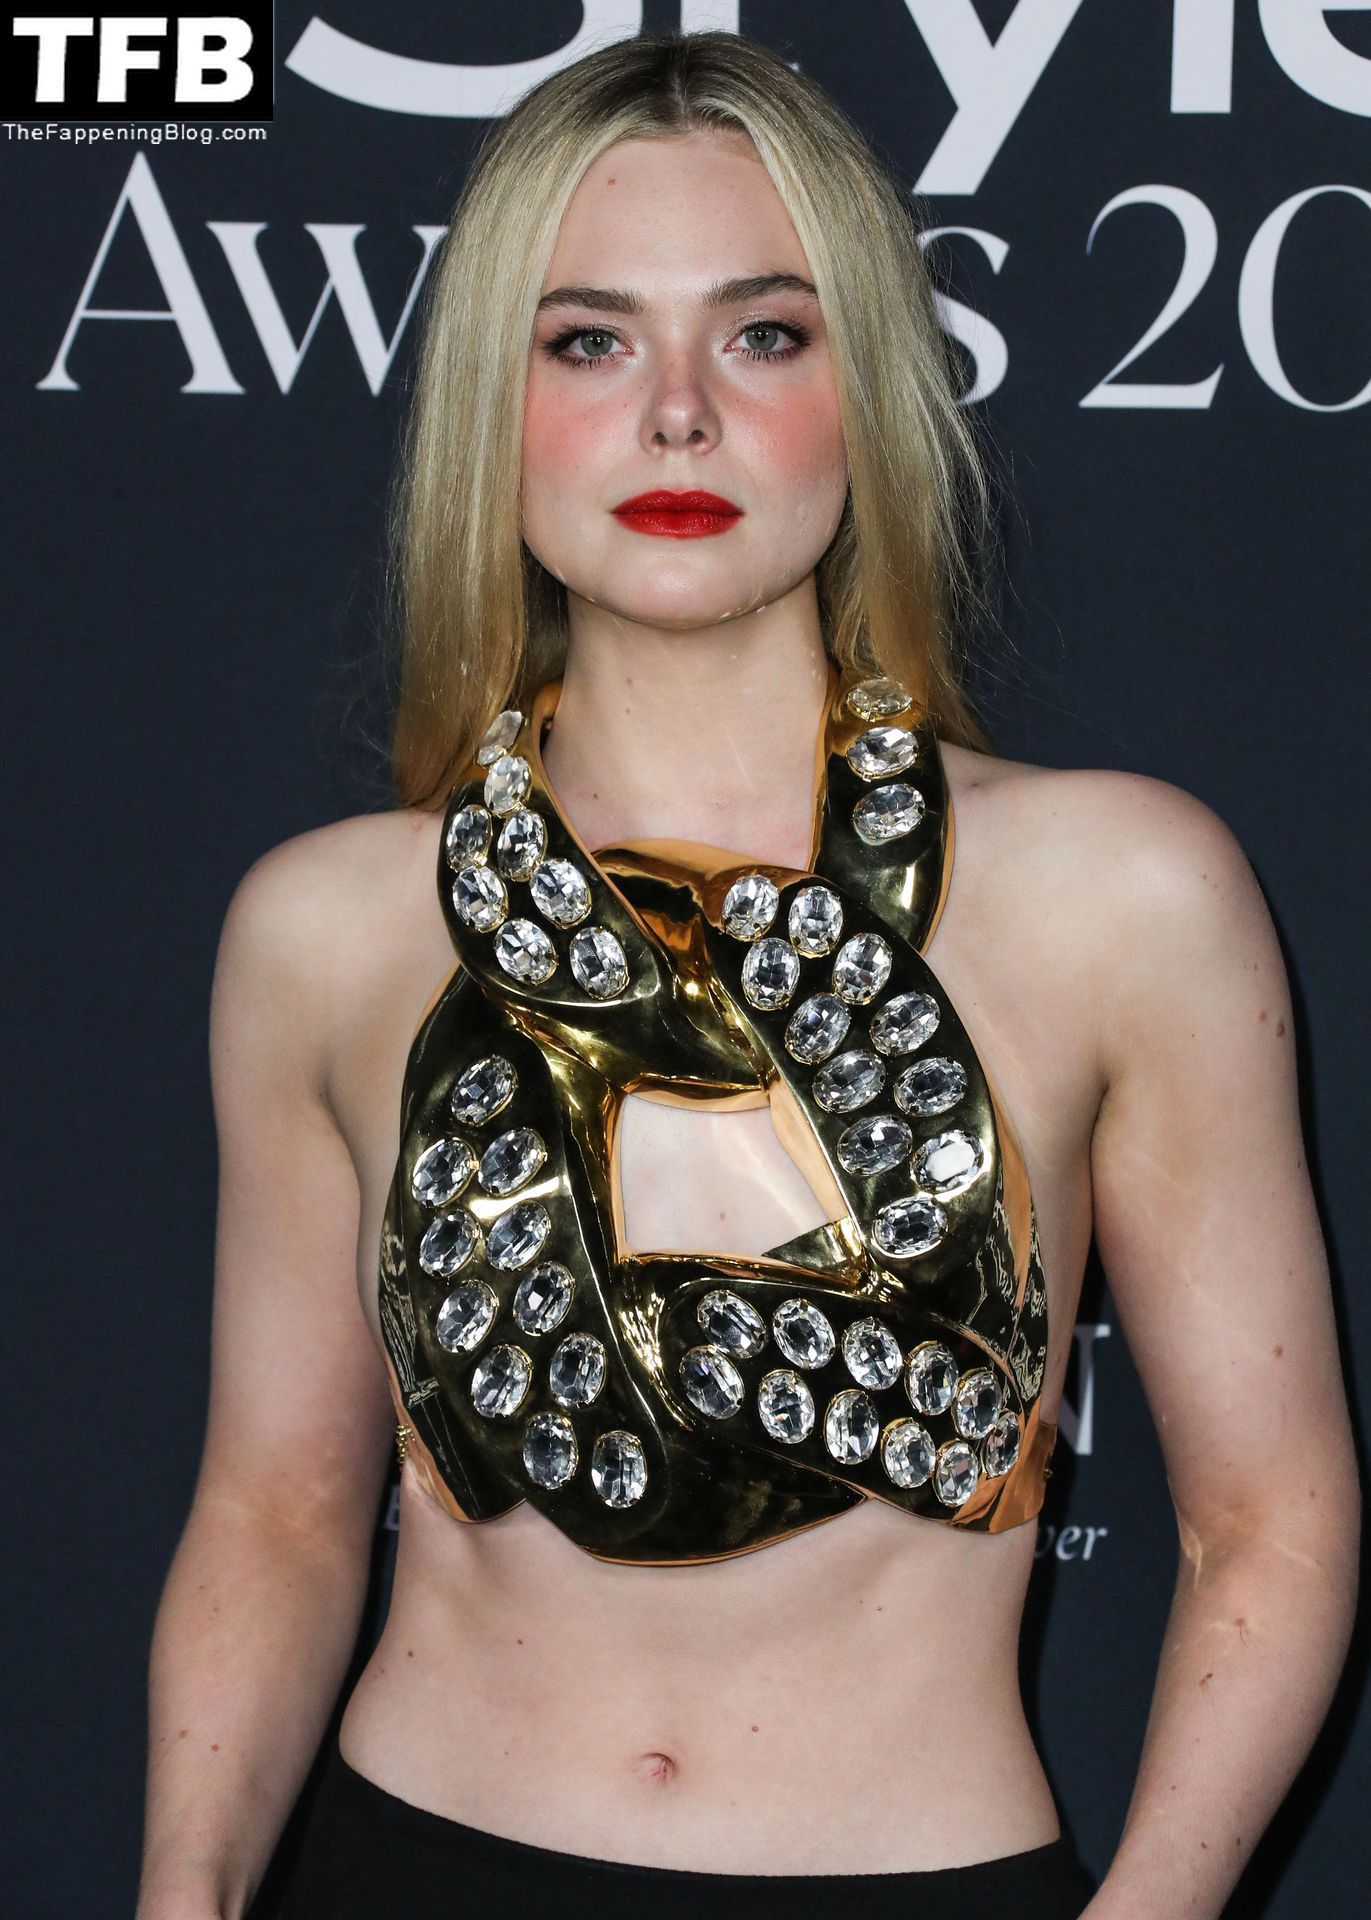 Elle-Fanning-Sexy-Braless-The-Fappening-Blog-6.jpg